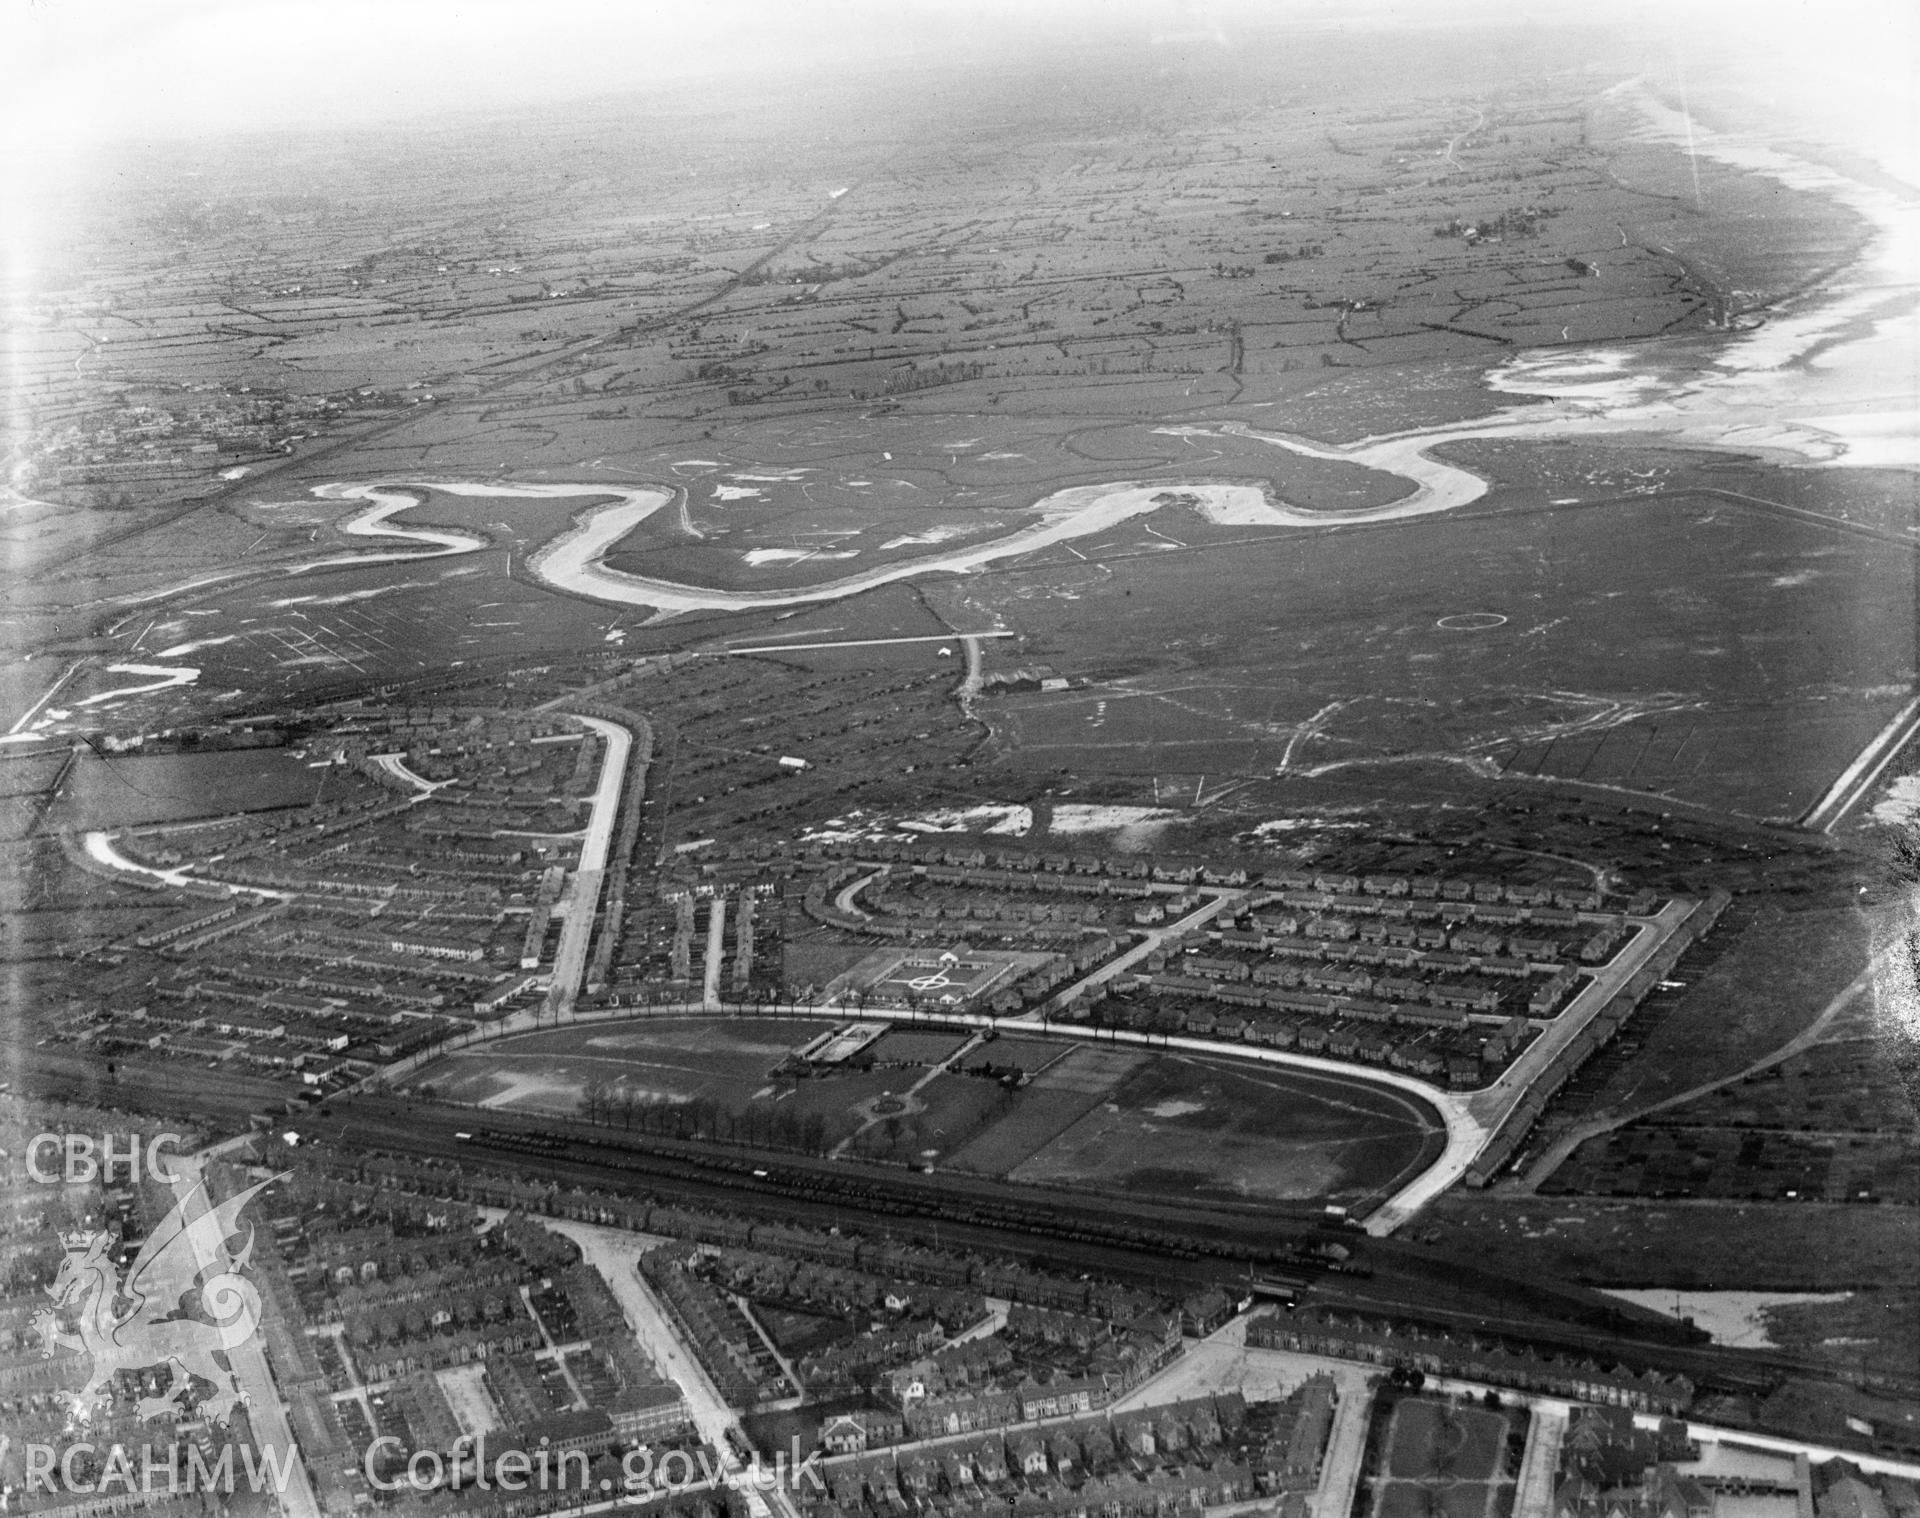 View of Splott, Cardiff, showing park and swimming pool, oblique aerial view. 5?x4? black and white glass plate negative.